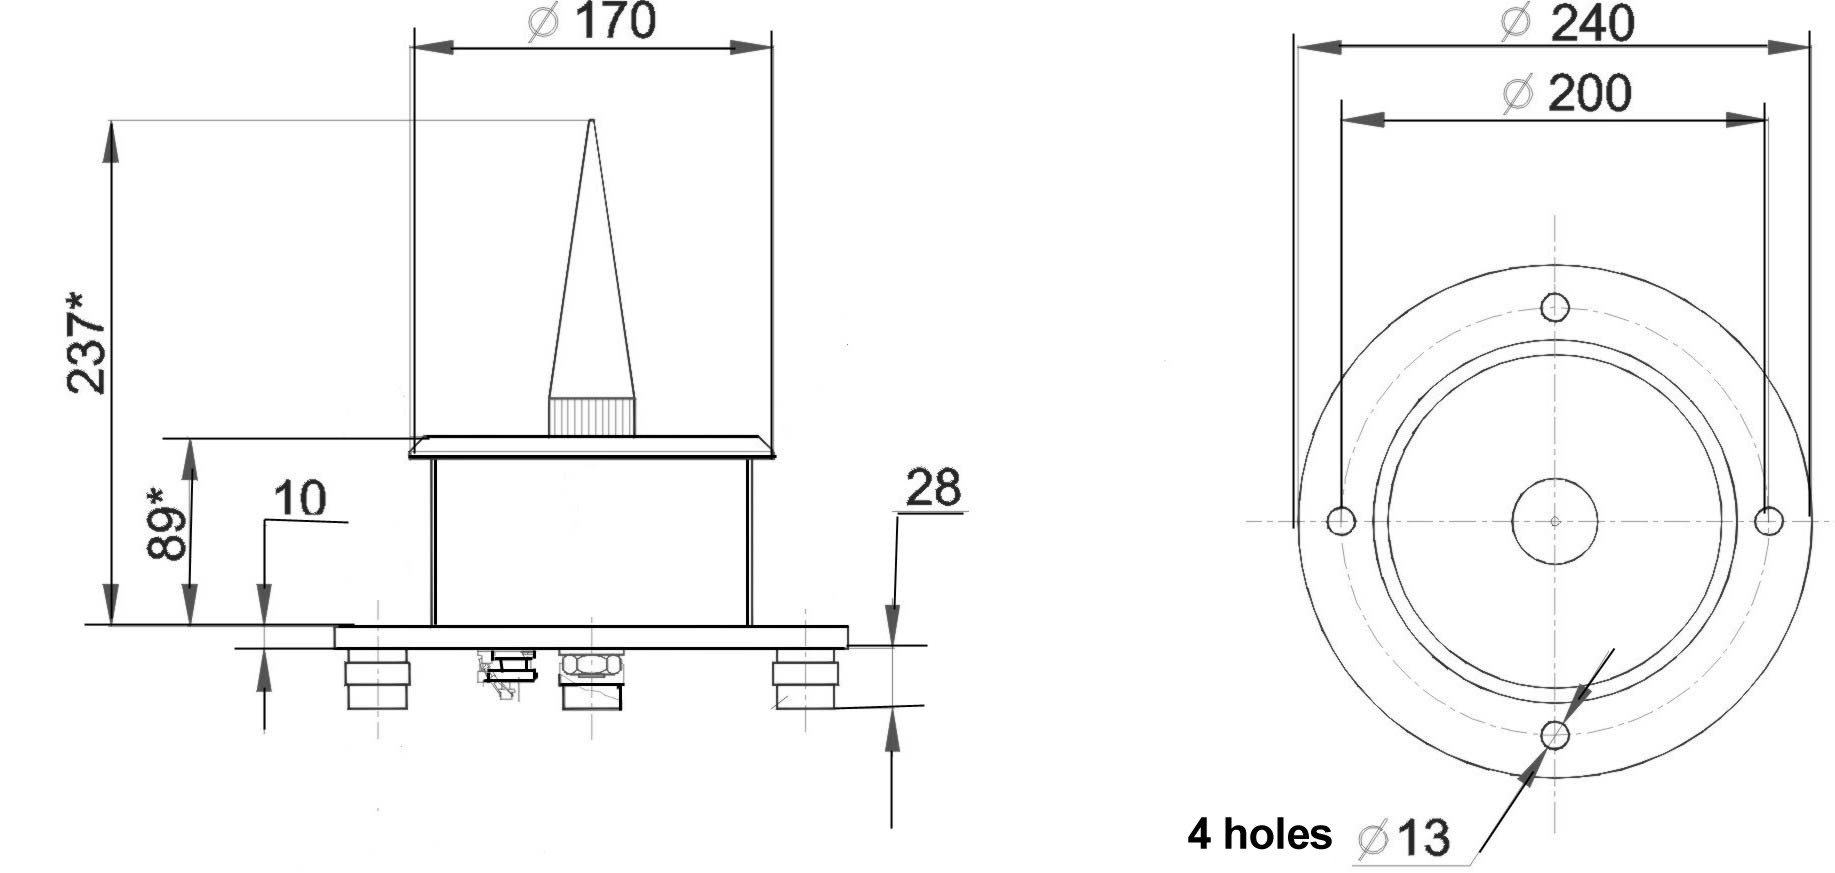 Layout and dimensions of E825